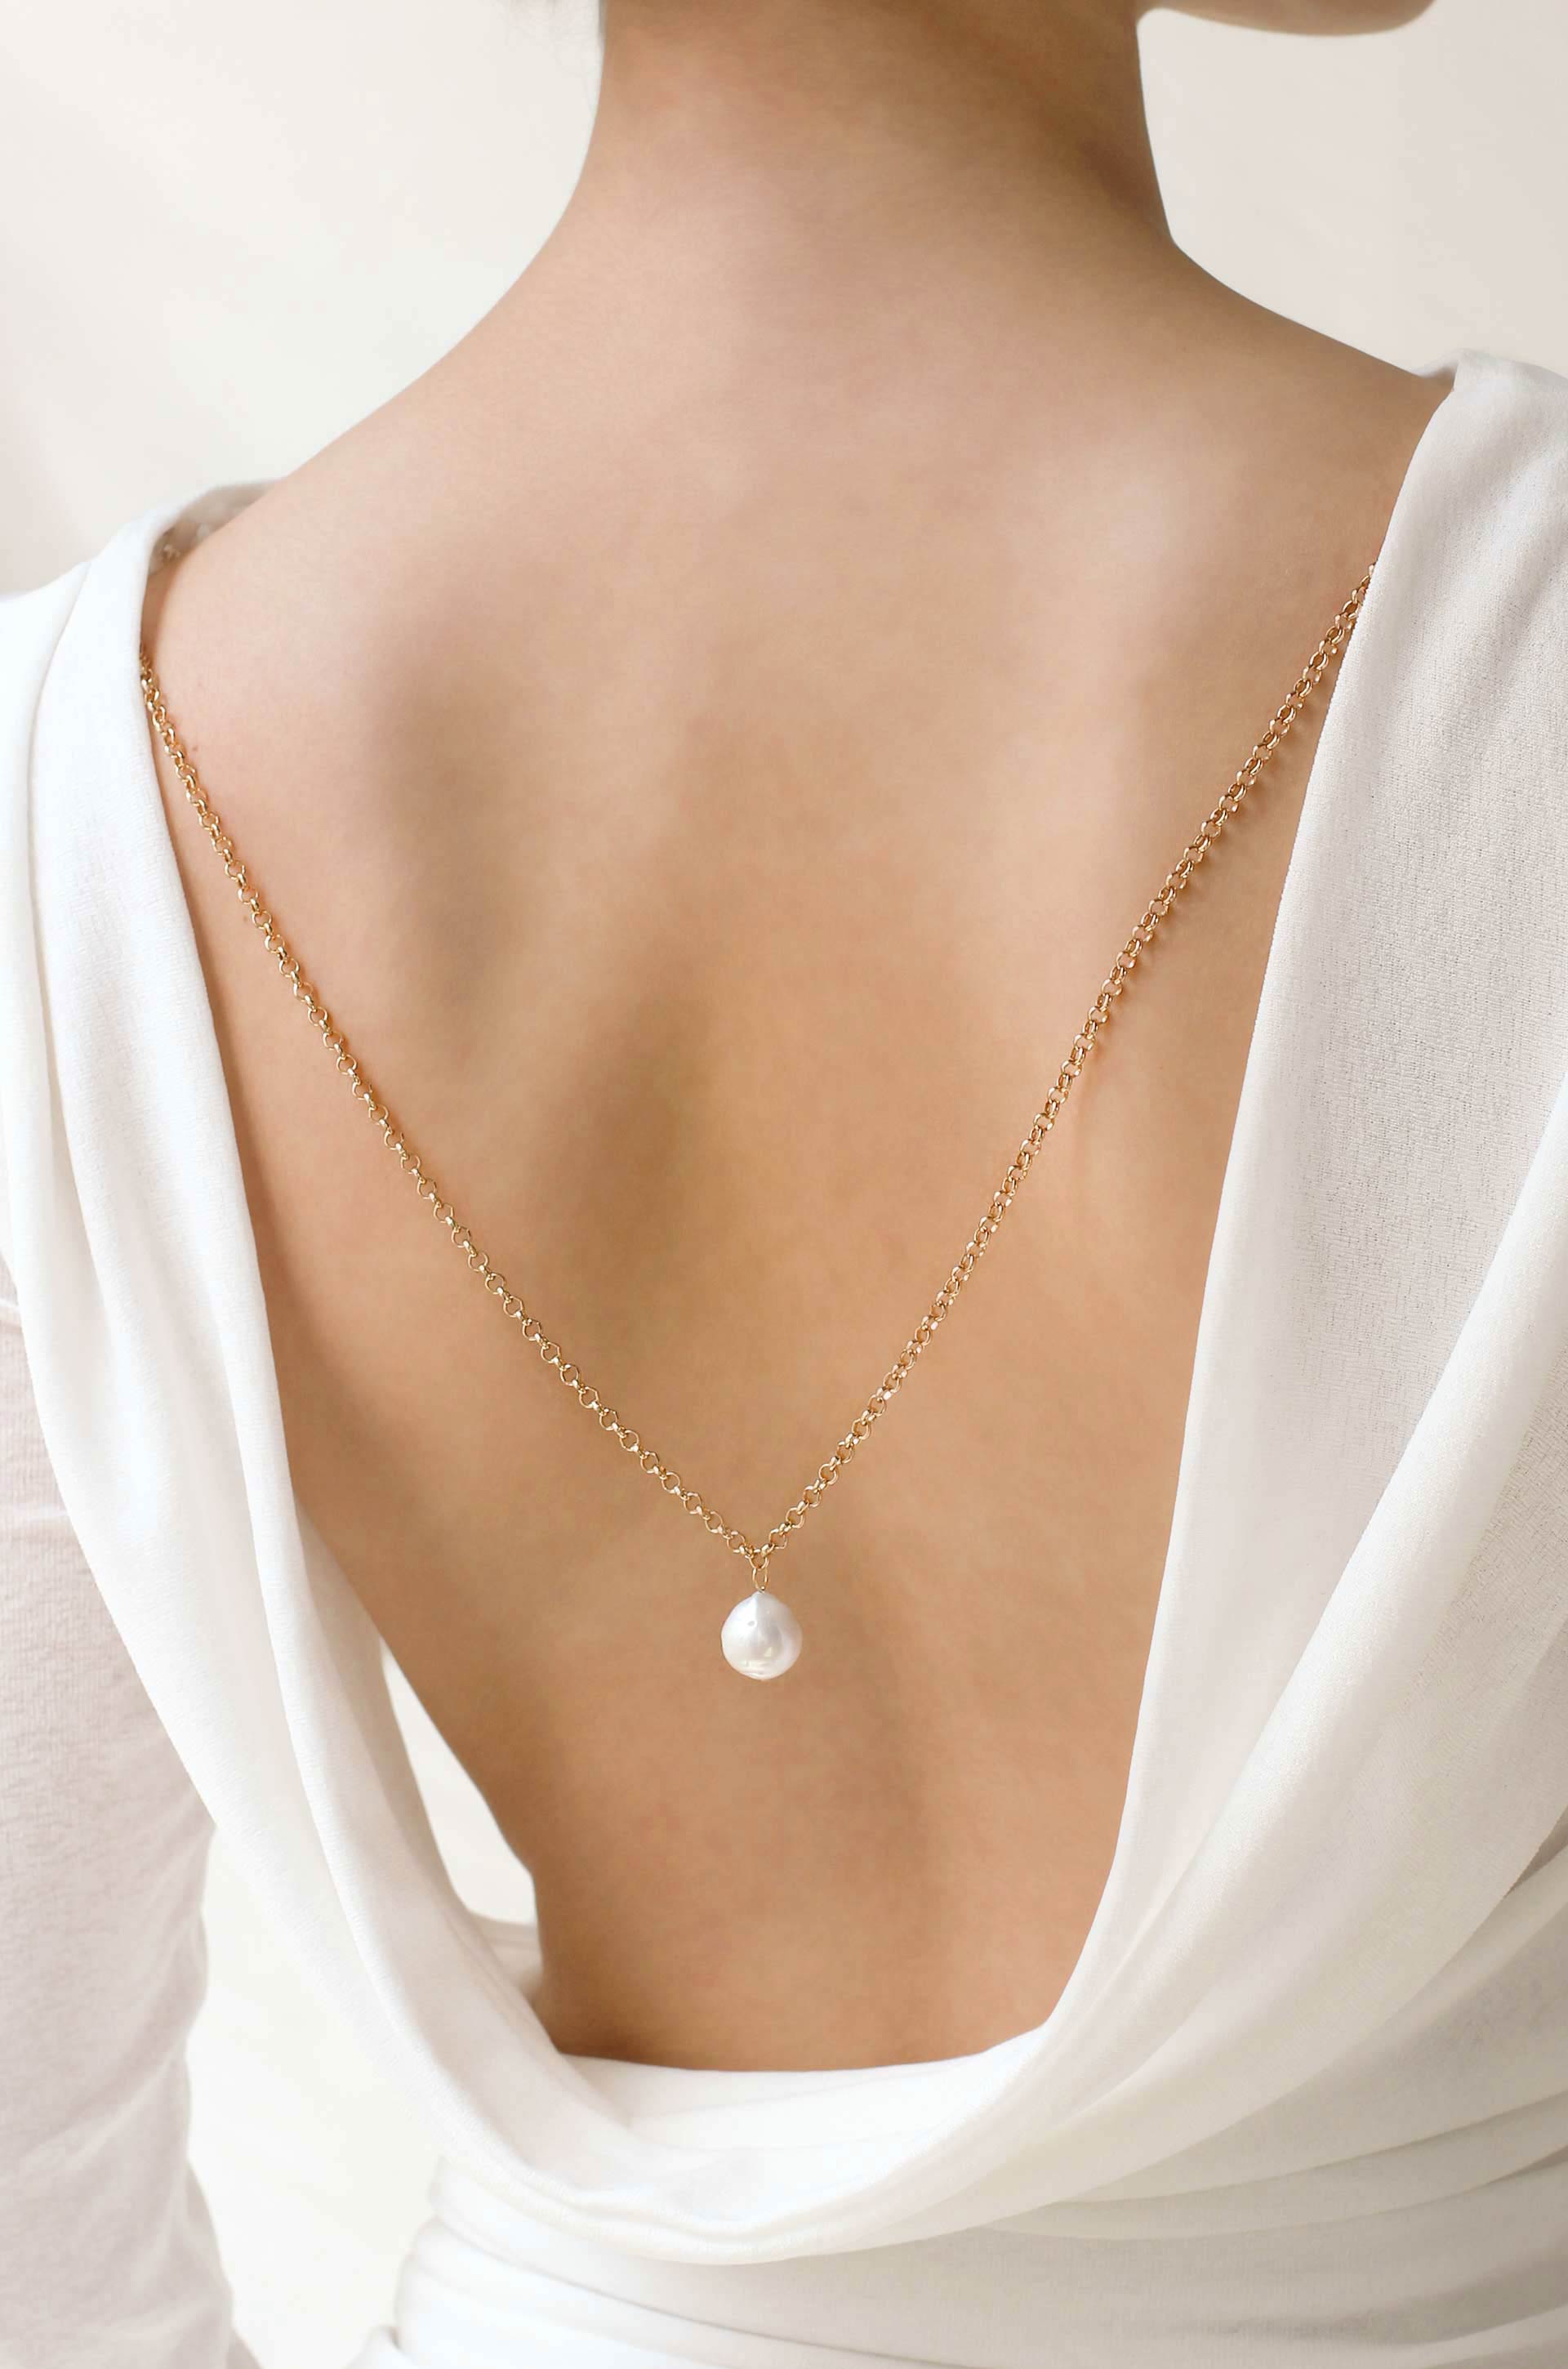 Pearl Back Necklace, Bridal Jewelry, Backdrop Necklace, Wedding Jewelry, Back  Necklace Wedding, NB084 - Etsy